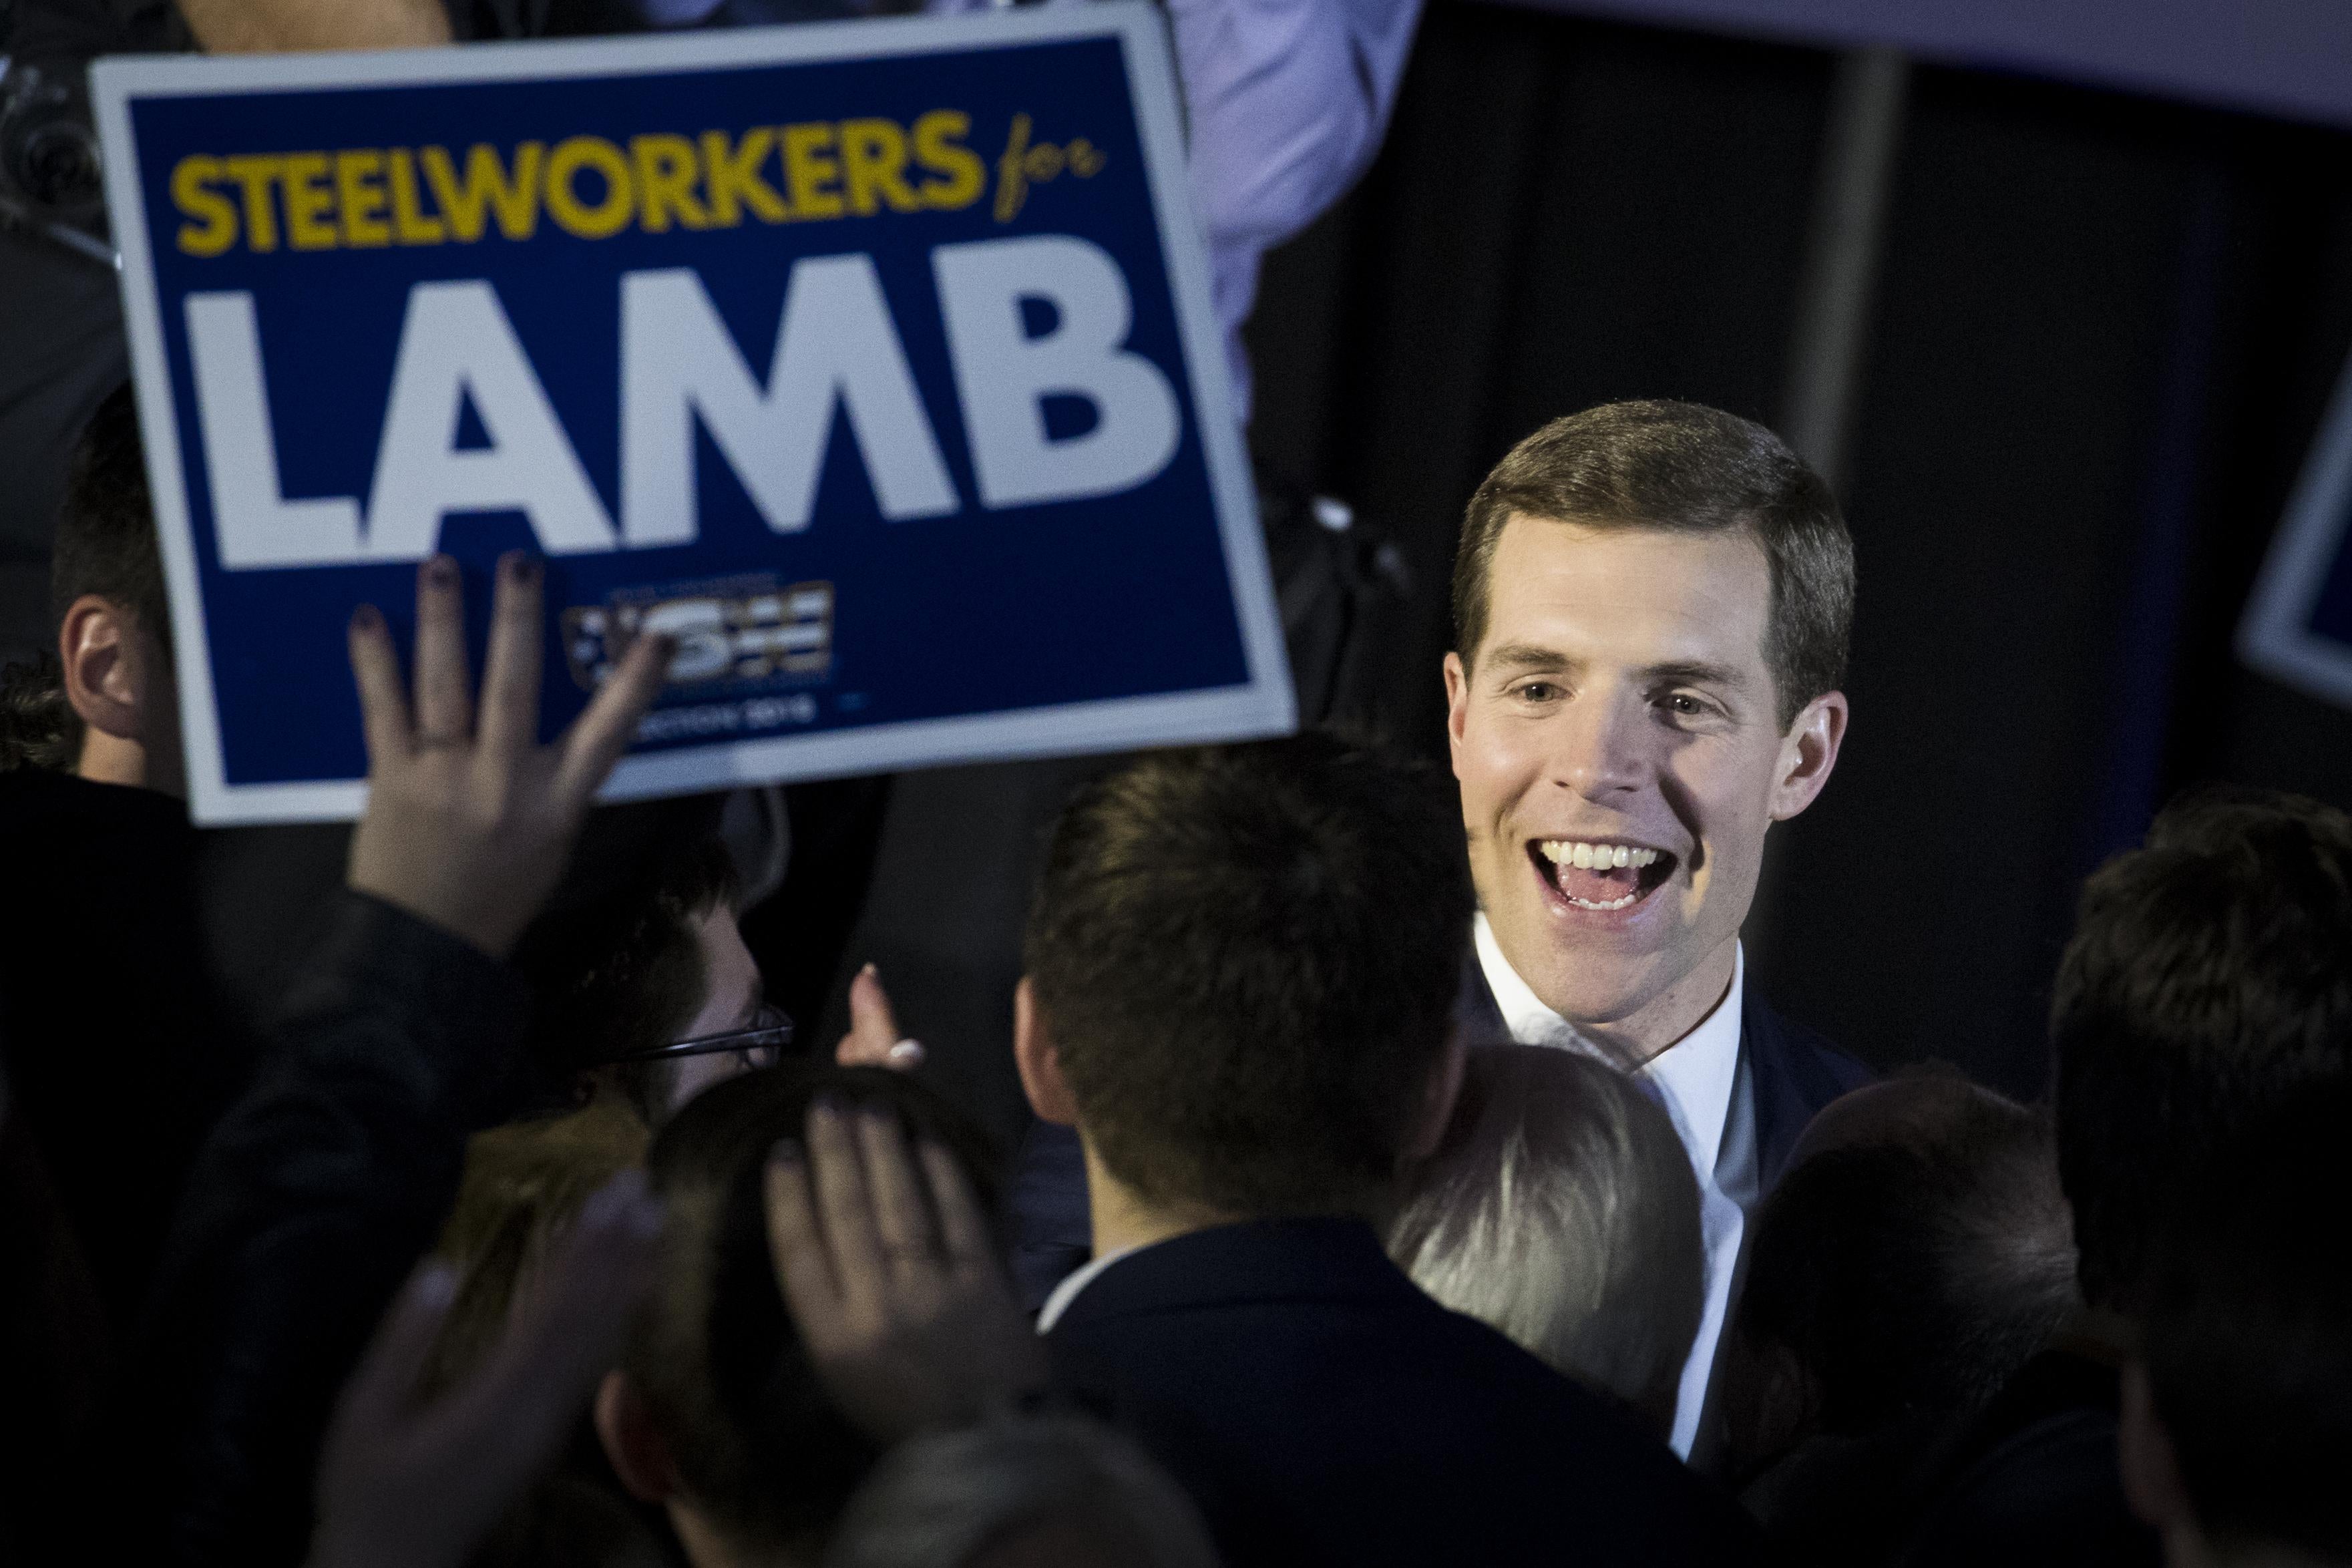 Conor Lamb greets supporters at an election night rally in March.